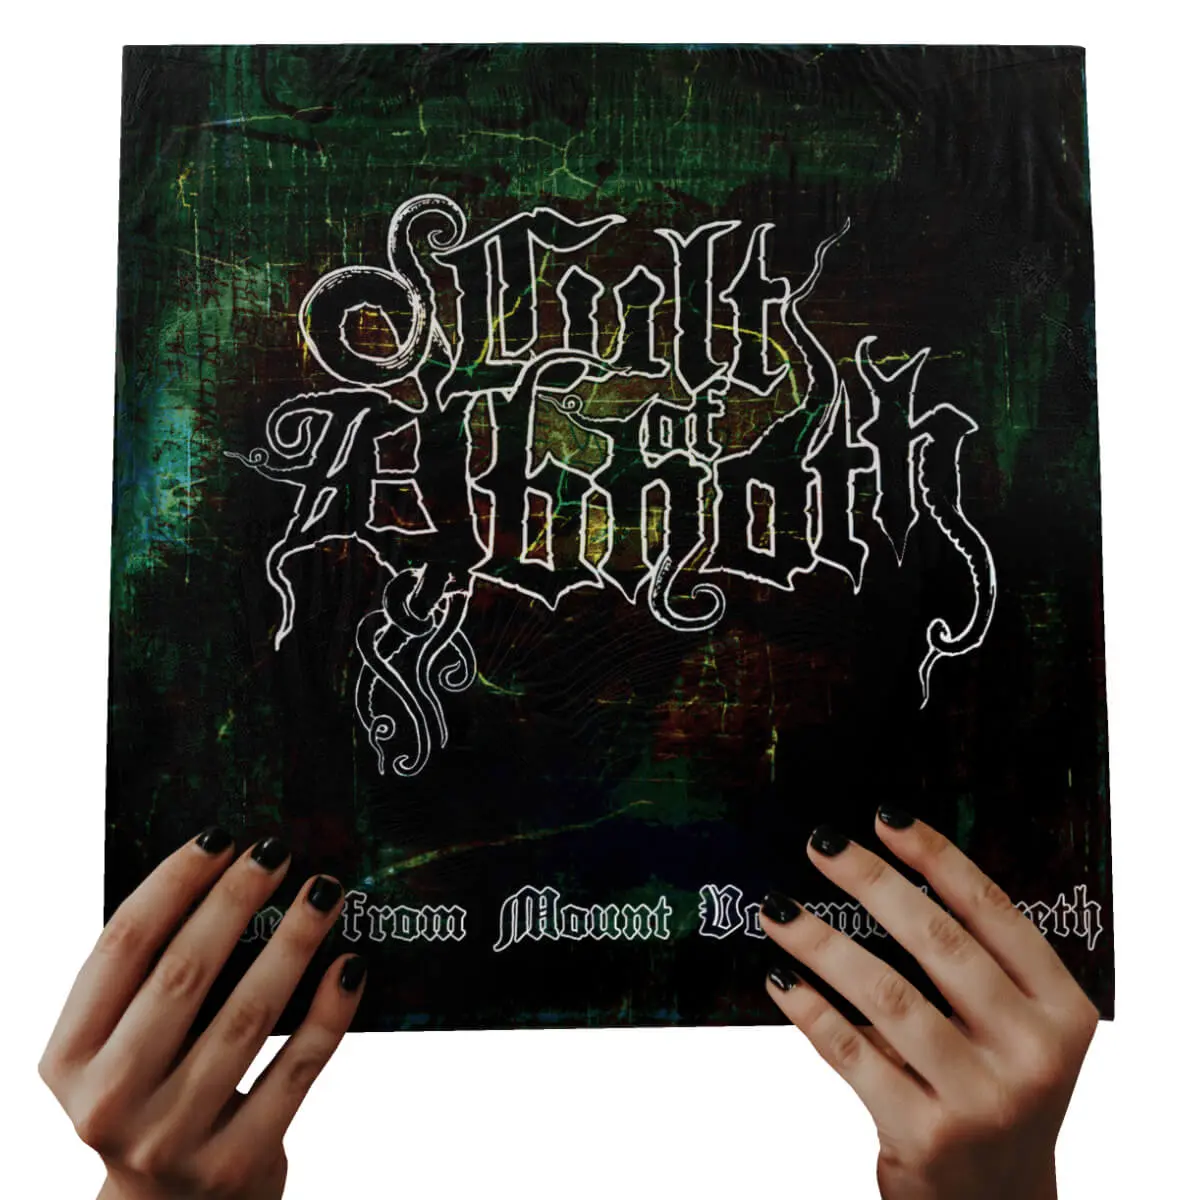 Cult Of Abhoth - Echoes from Mount Voormithadreth Download